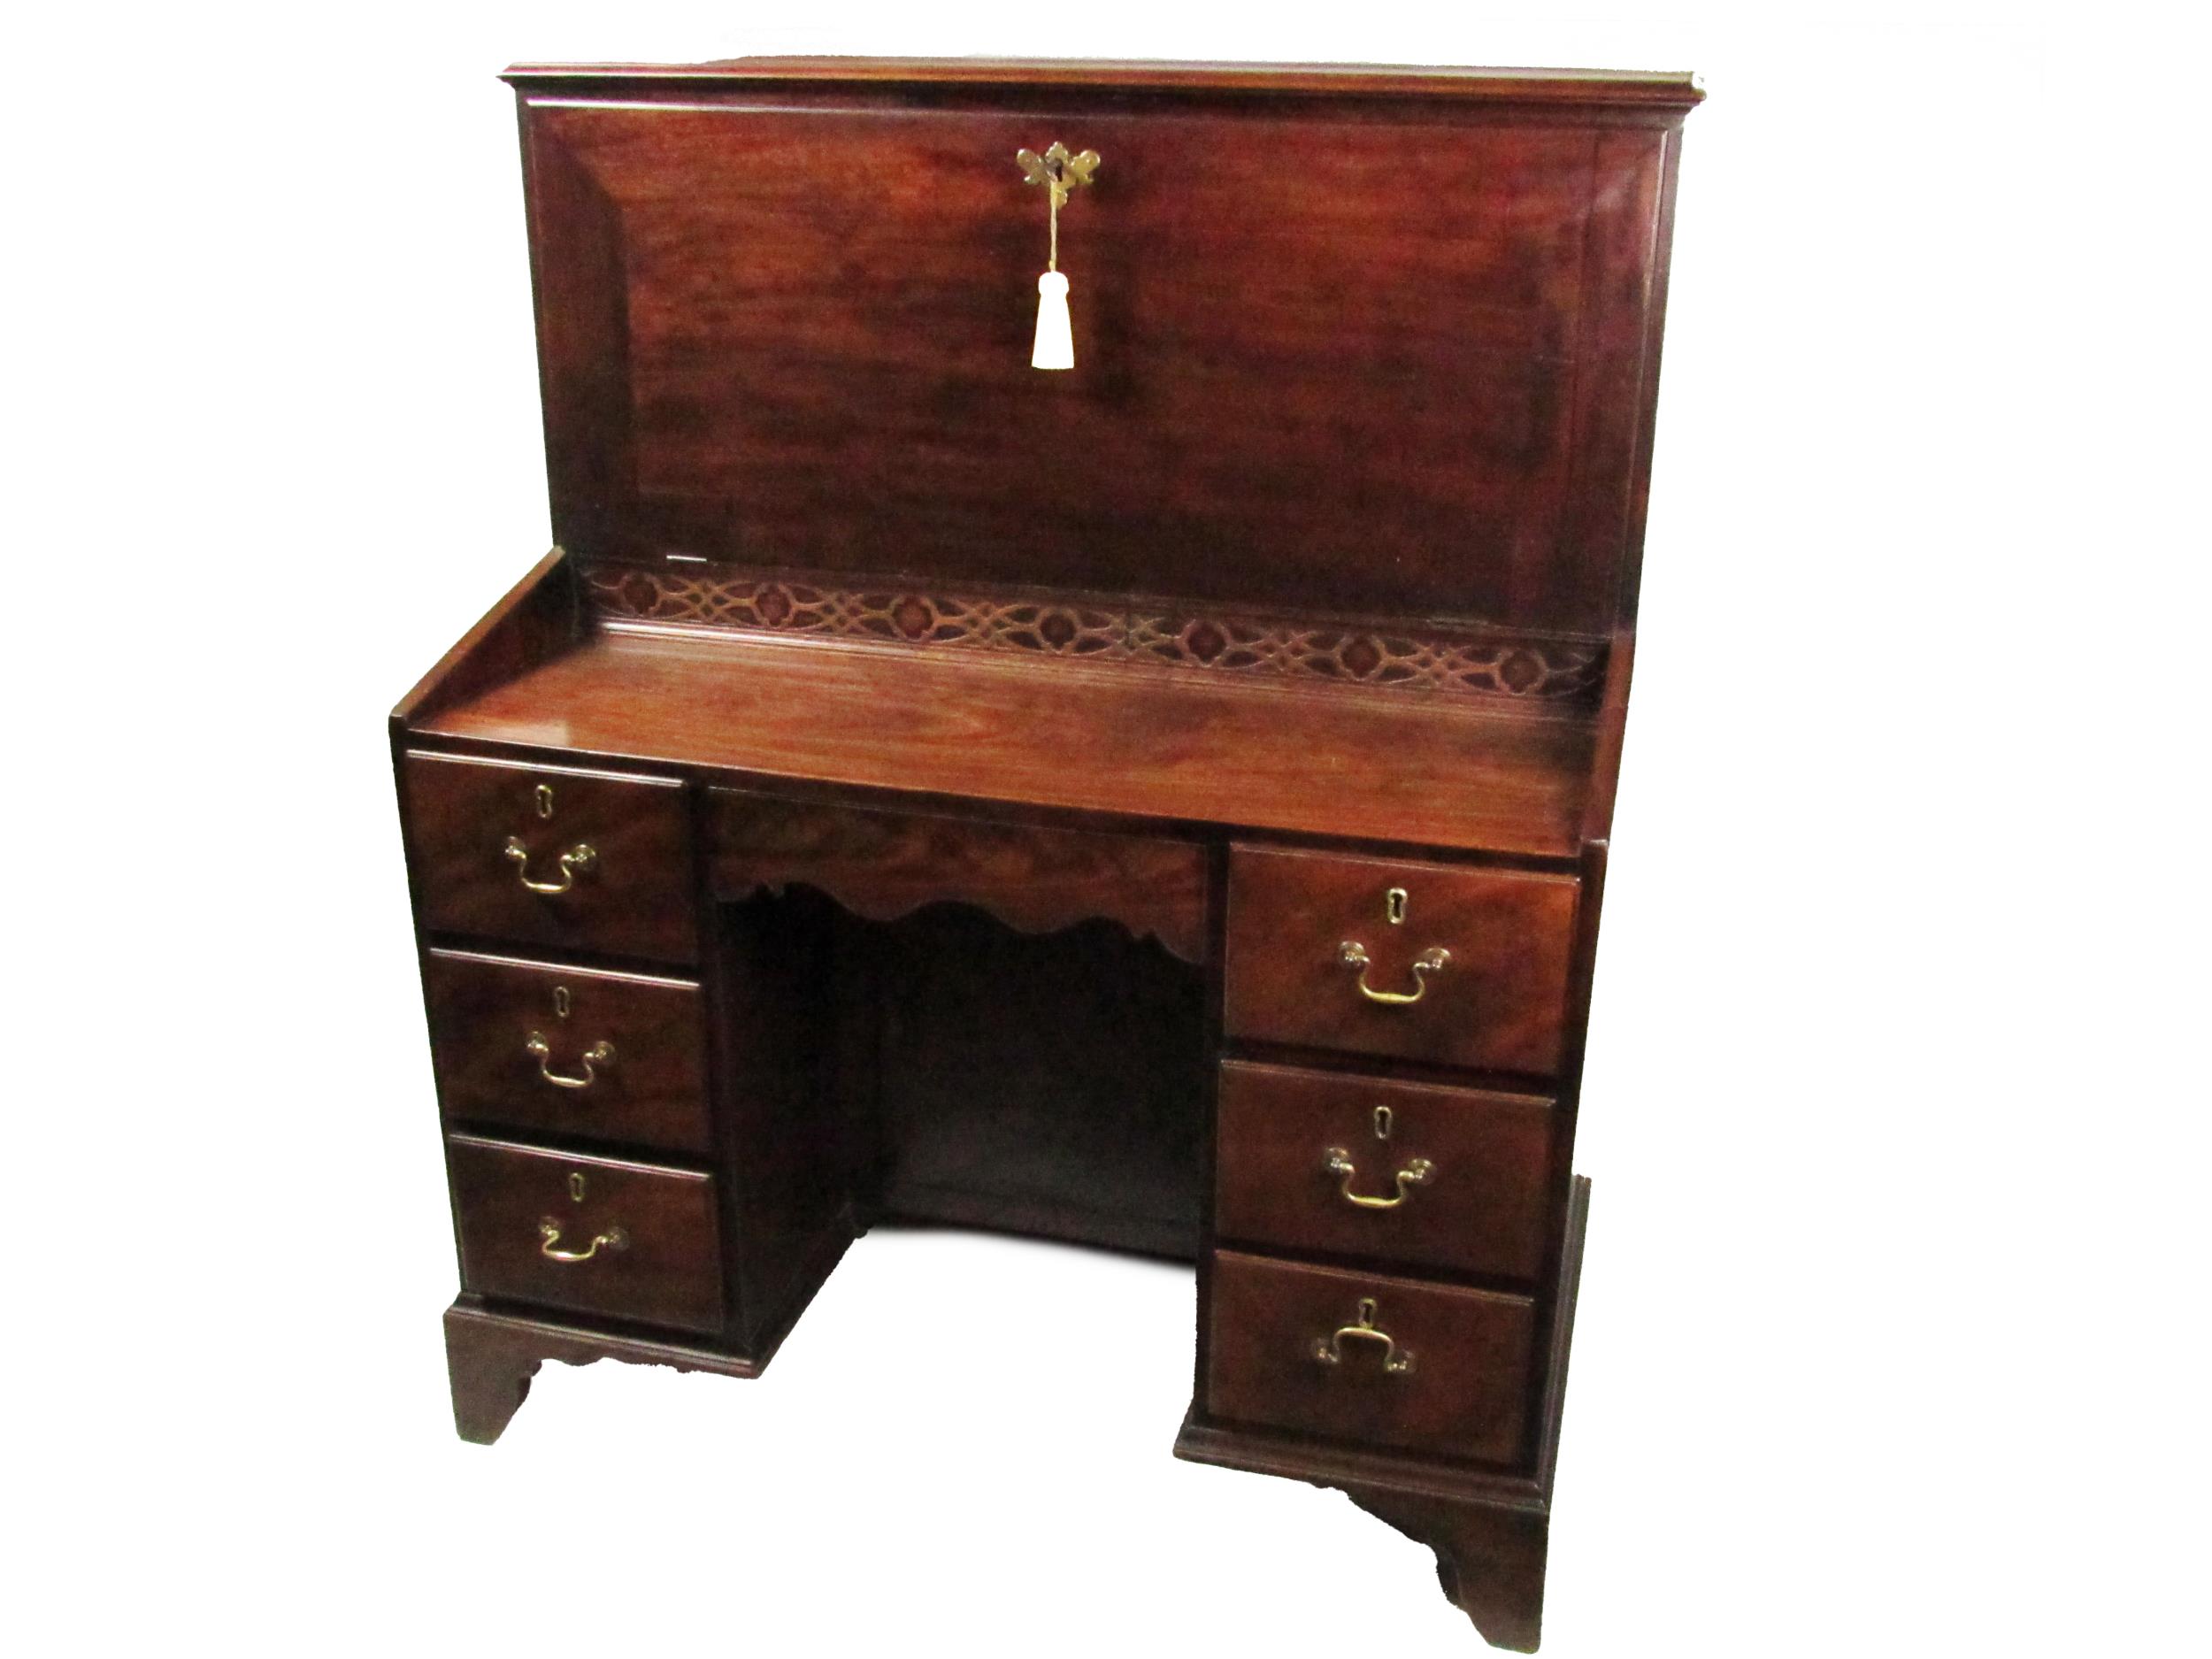 A rare and important Irish Georgian mahogany Estate Desk, in the manner of Chippendale, the - Image 2 of 2